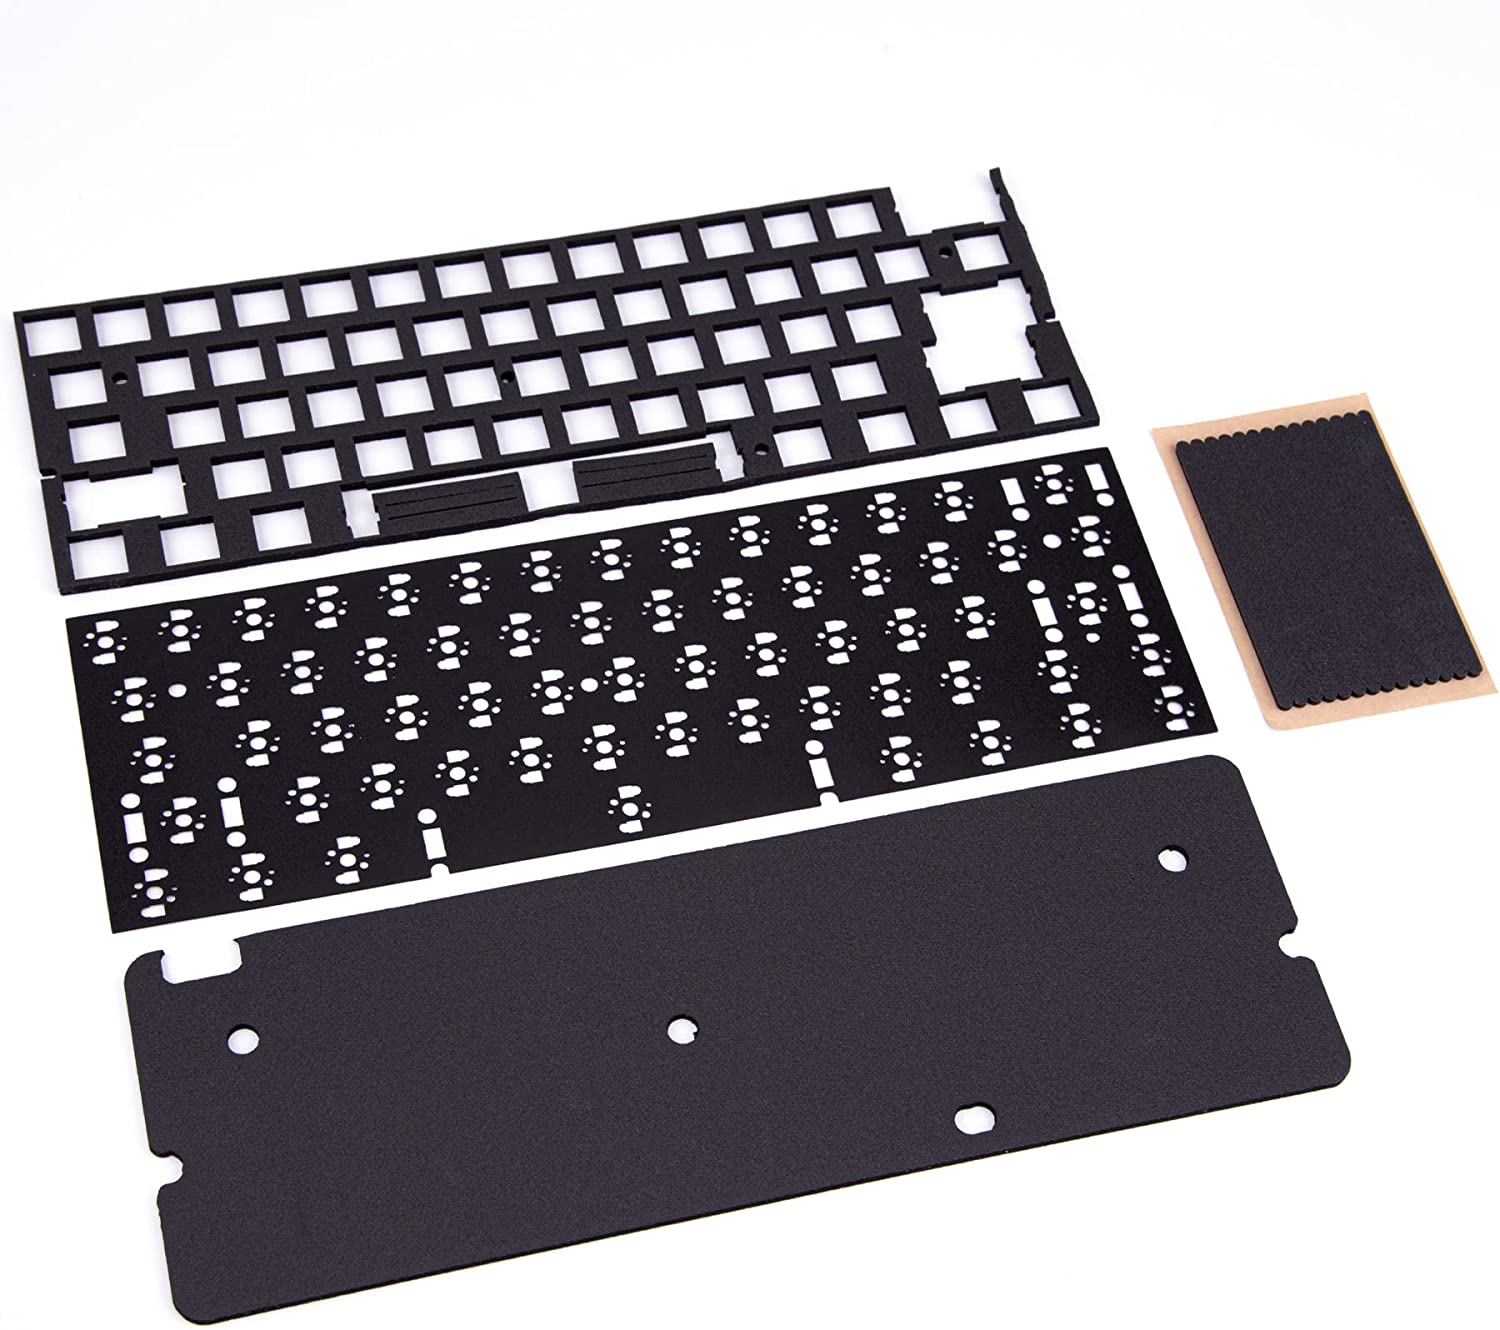 A foam dampening kit can be used at home and can make all the difference to the sound of your mechanical gaming keyboard.